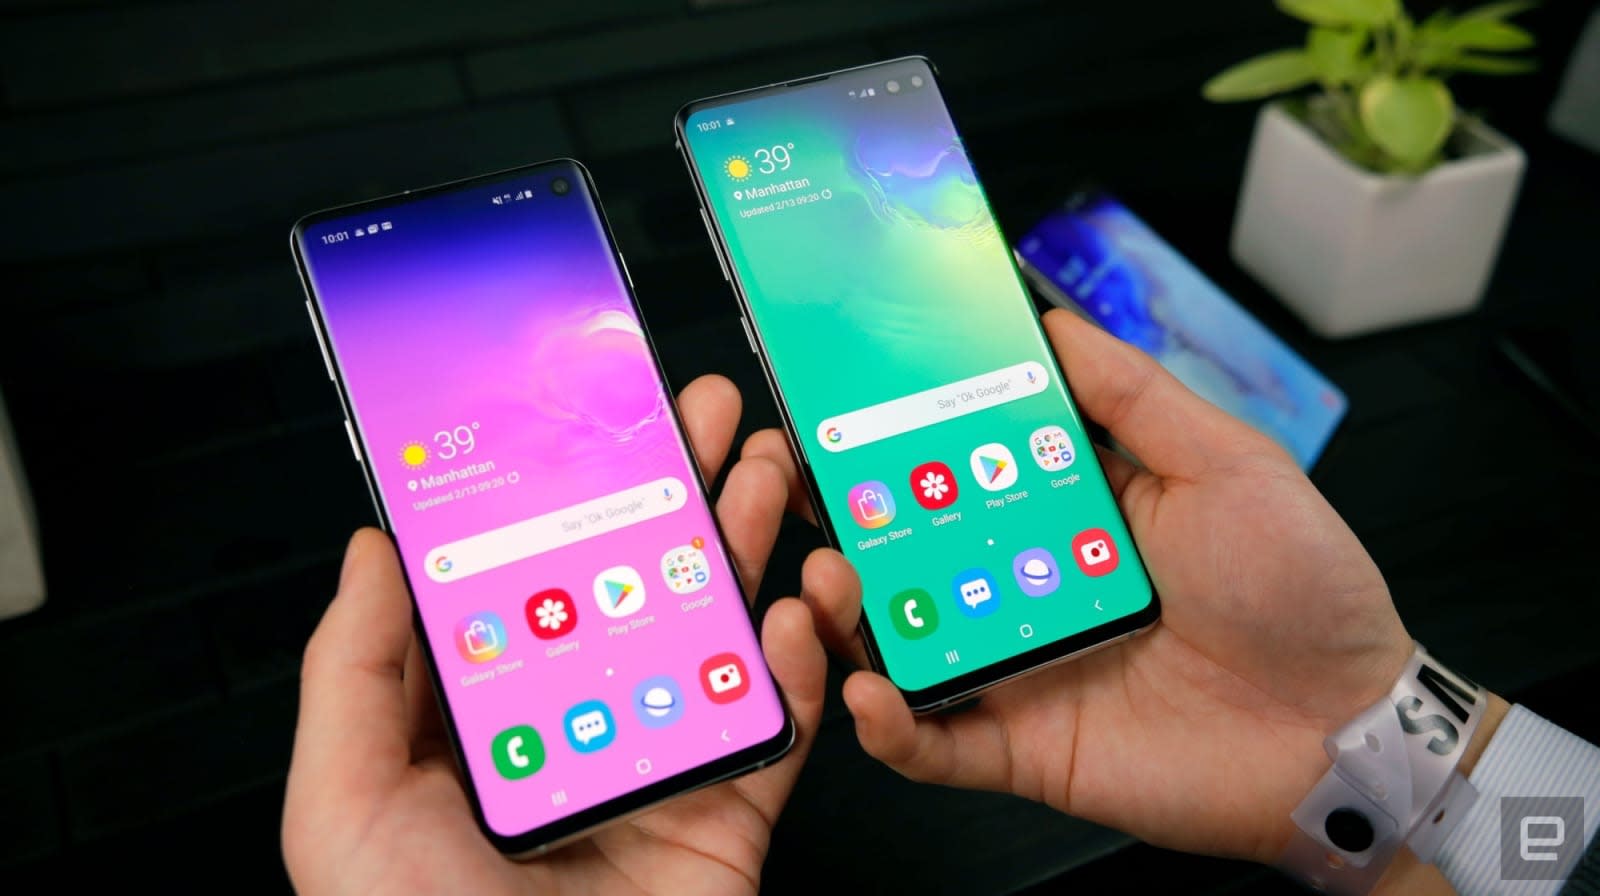 Samsung is giving away a screen protector with the Galaxy S10 - Engadget